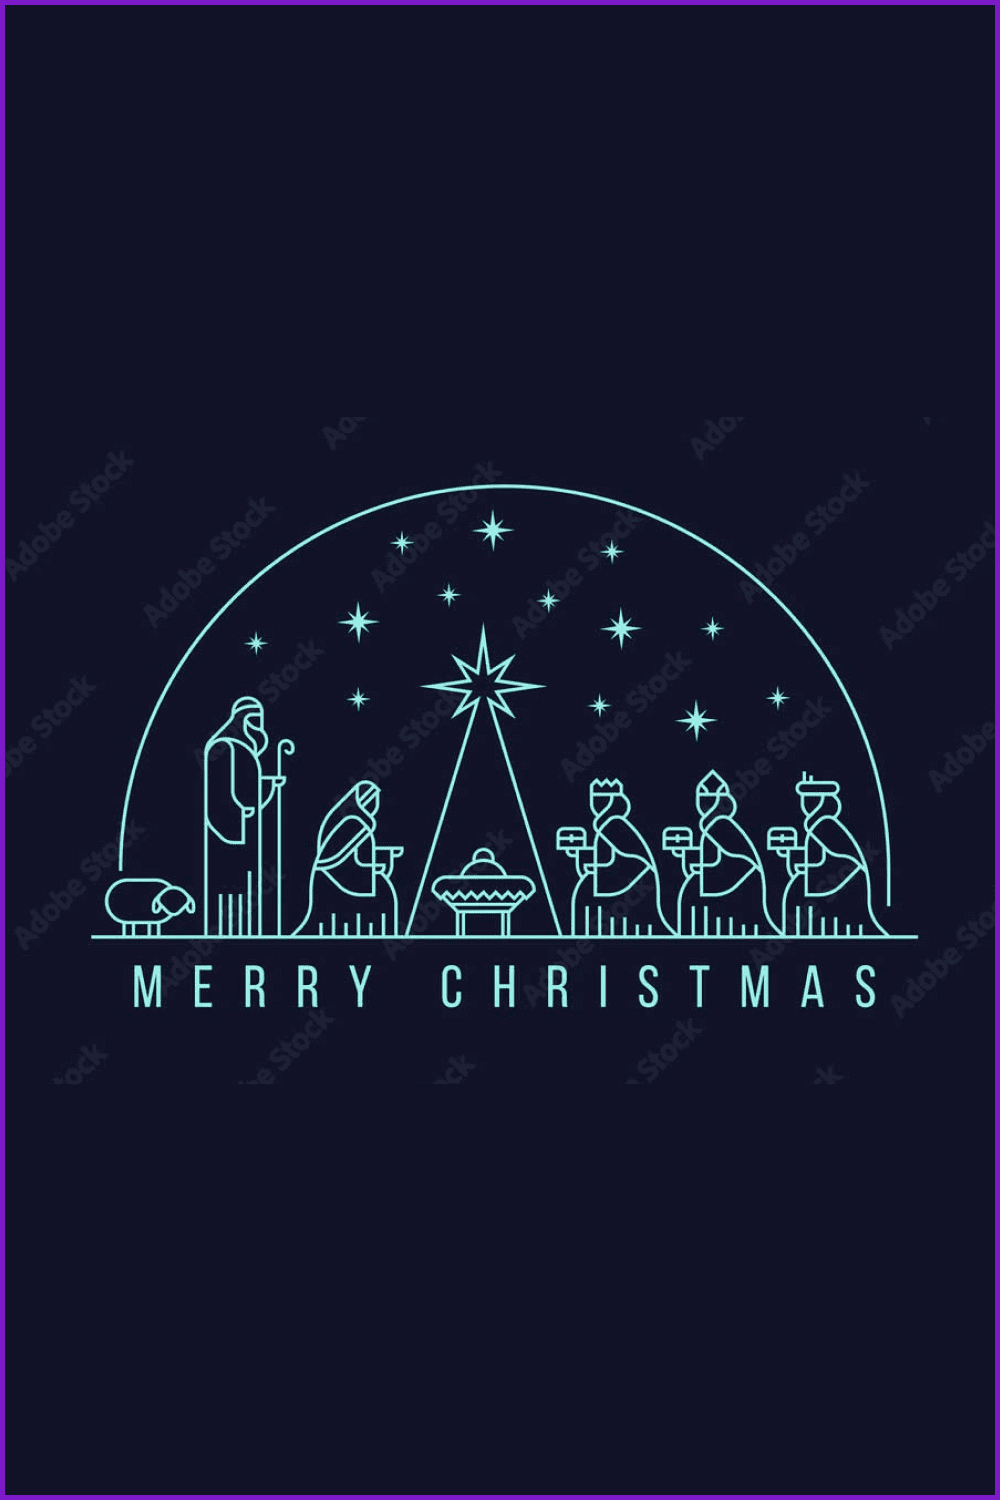 Christmas religious image on a dark background.